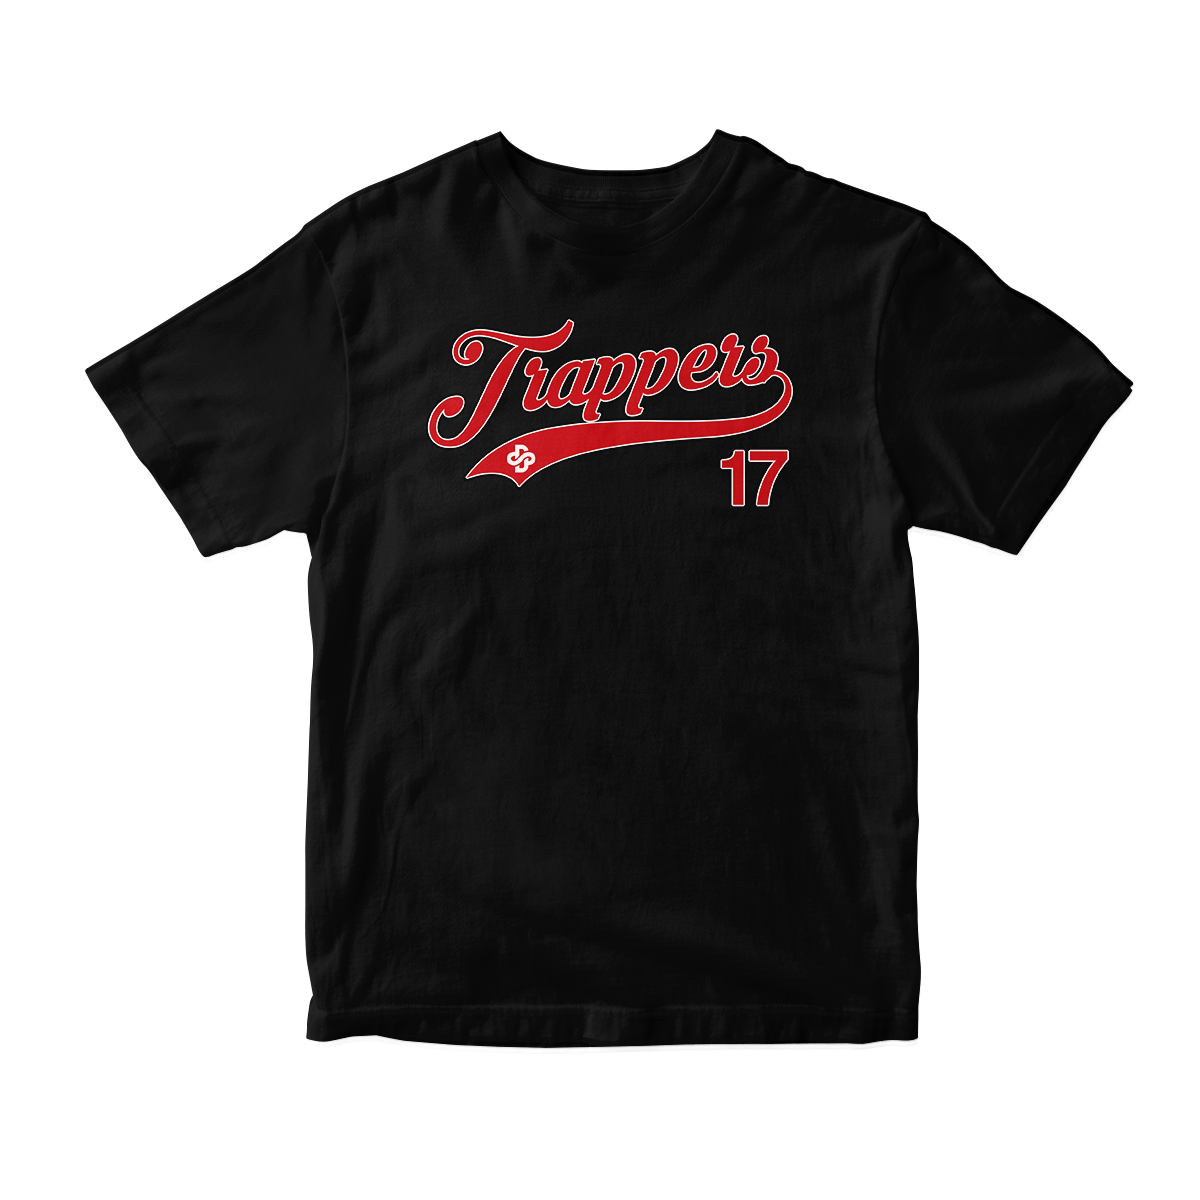 'Trappers' in Gym Red CW Unisex Short Sleeve Tee